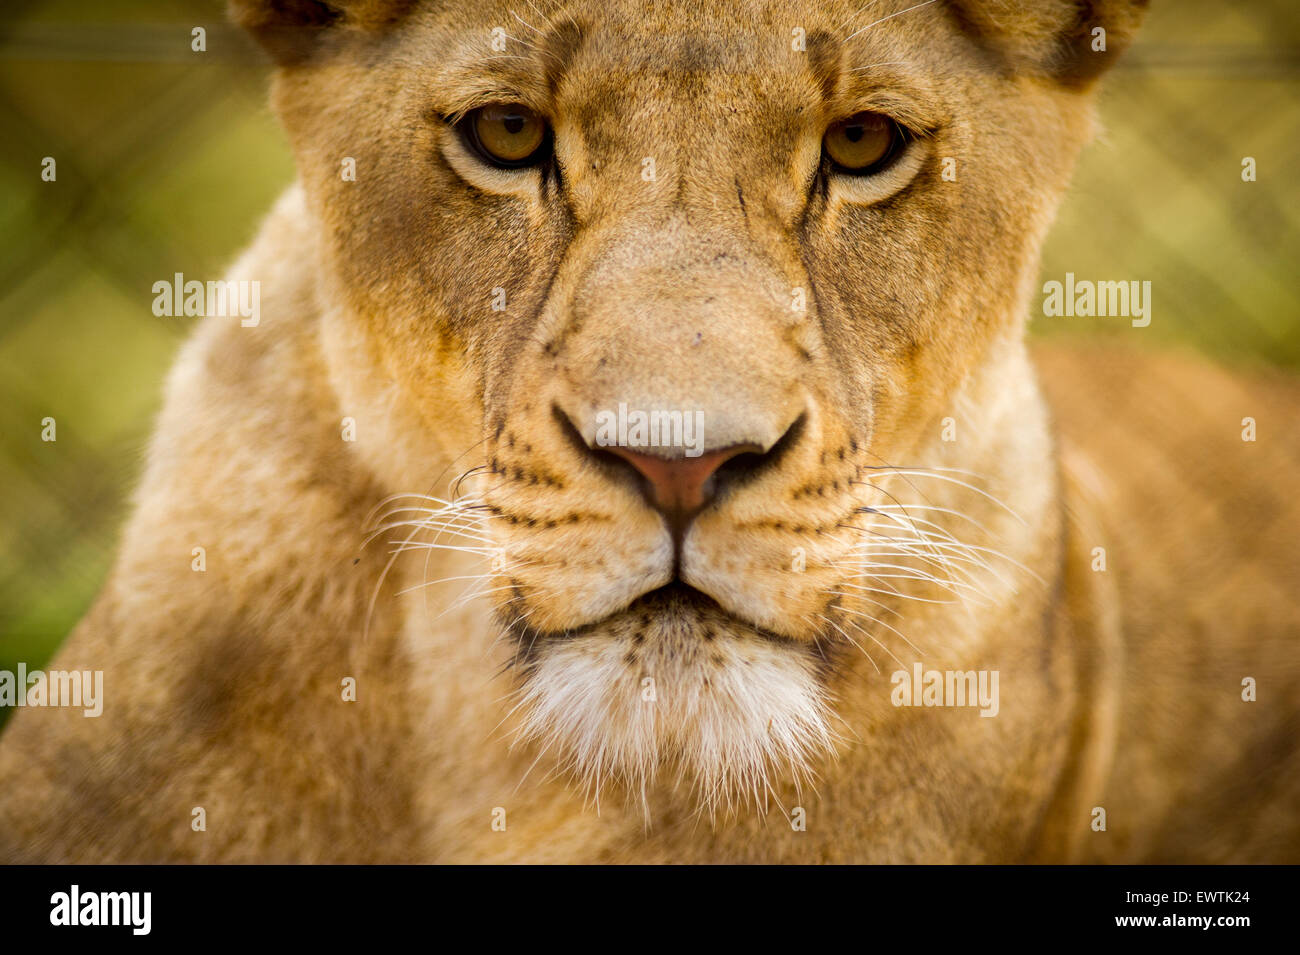 SOUTH AFRICA- Lioness (panthera leo) prowling within the confines of a game reserve Stock Photo